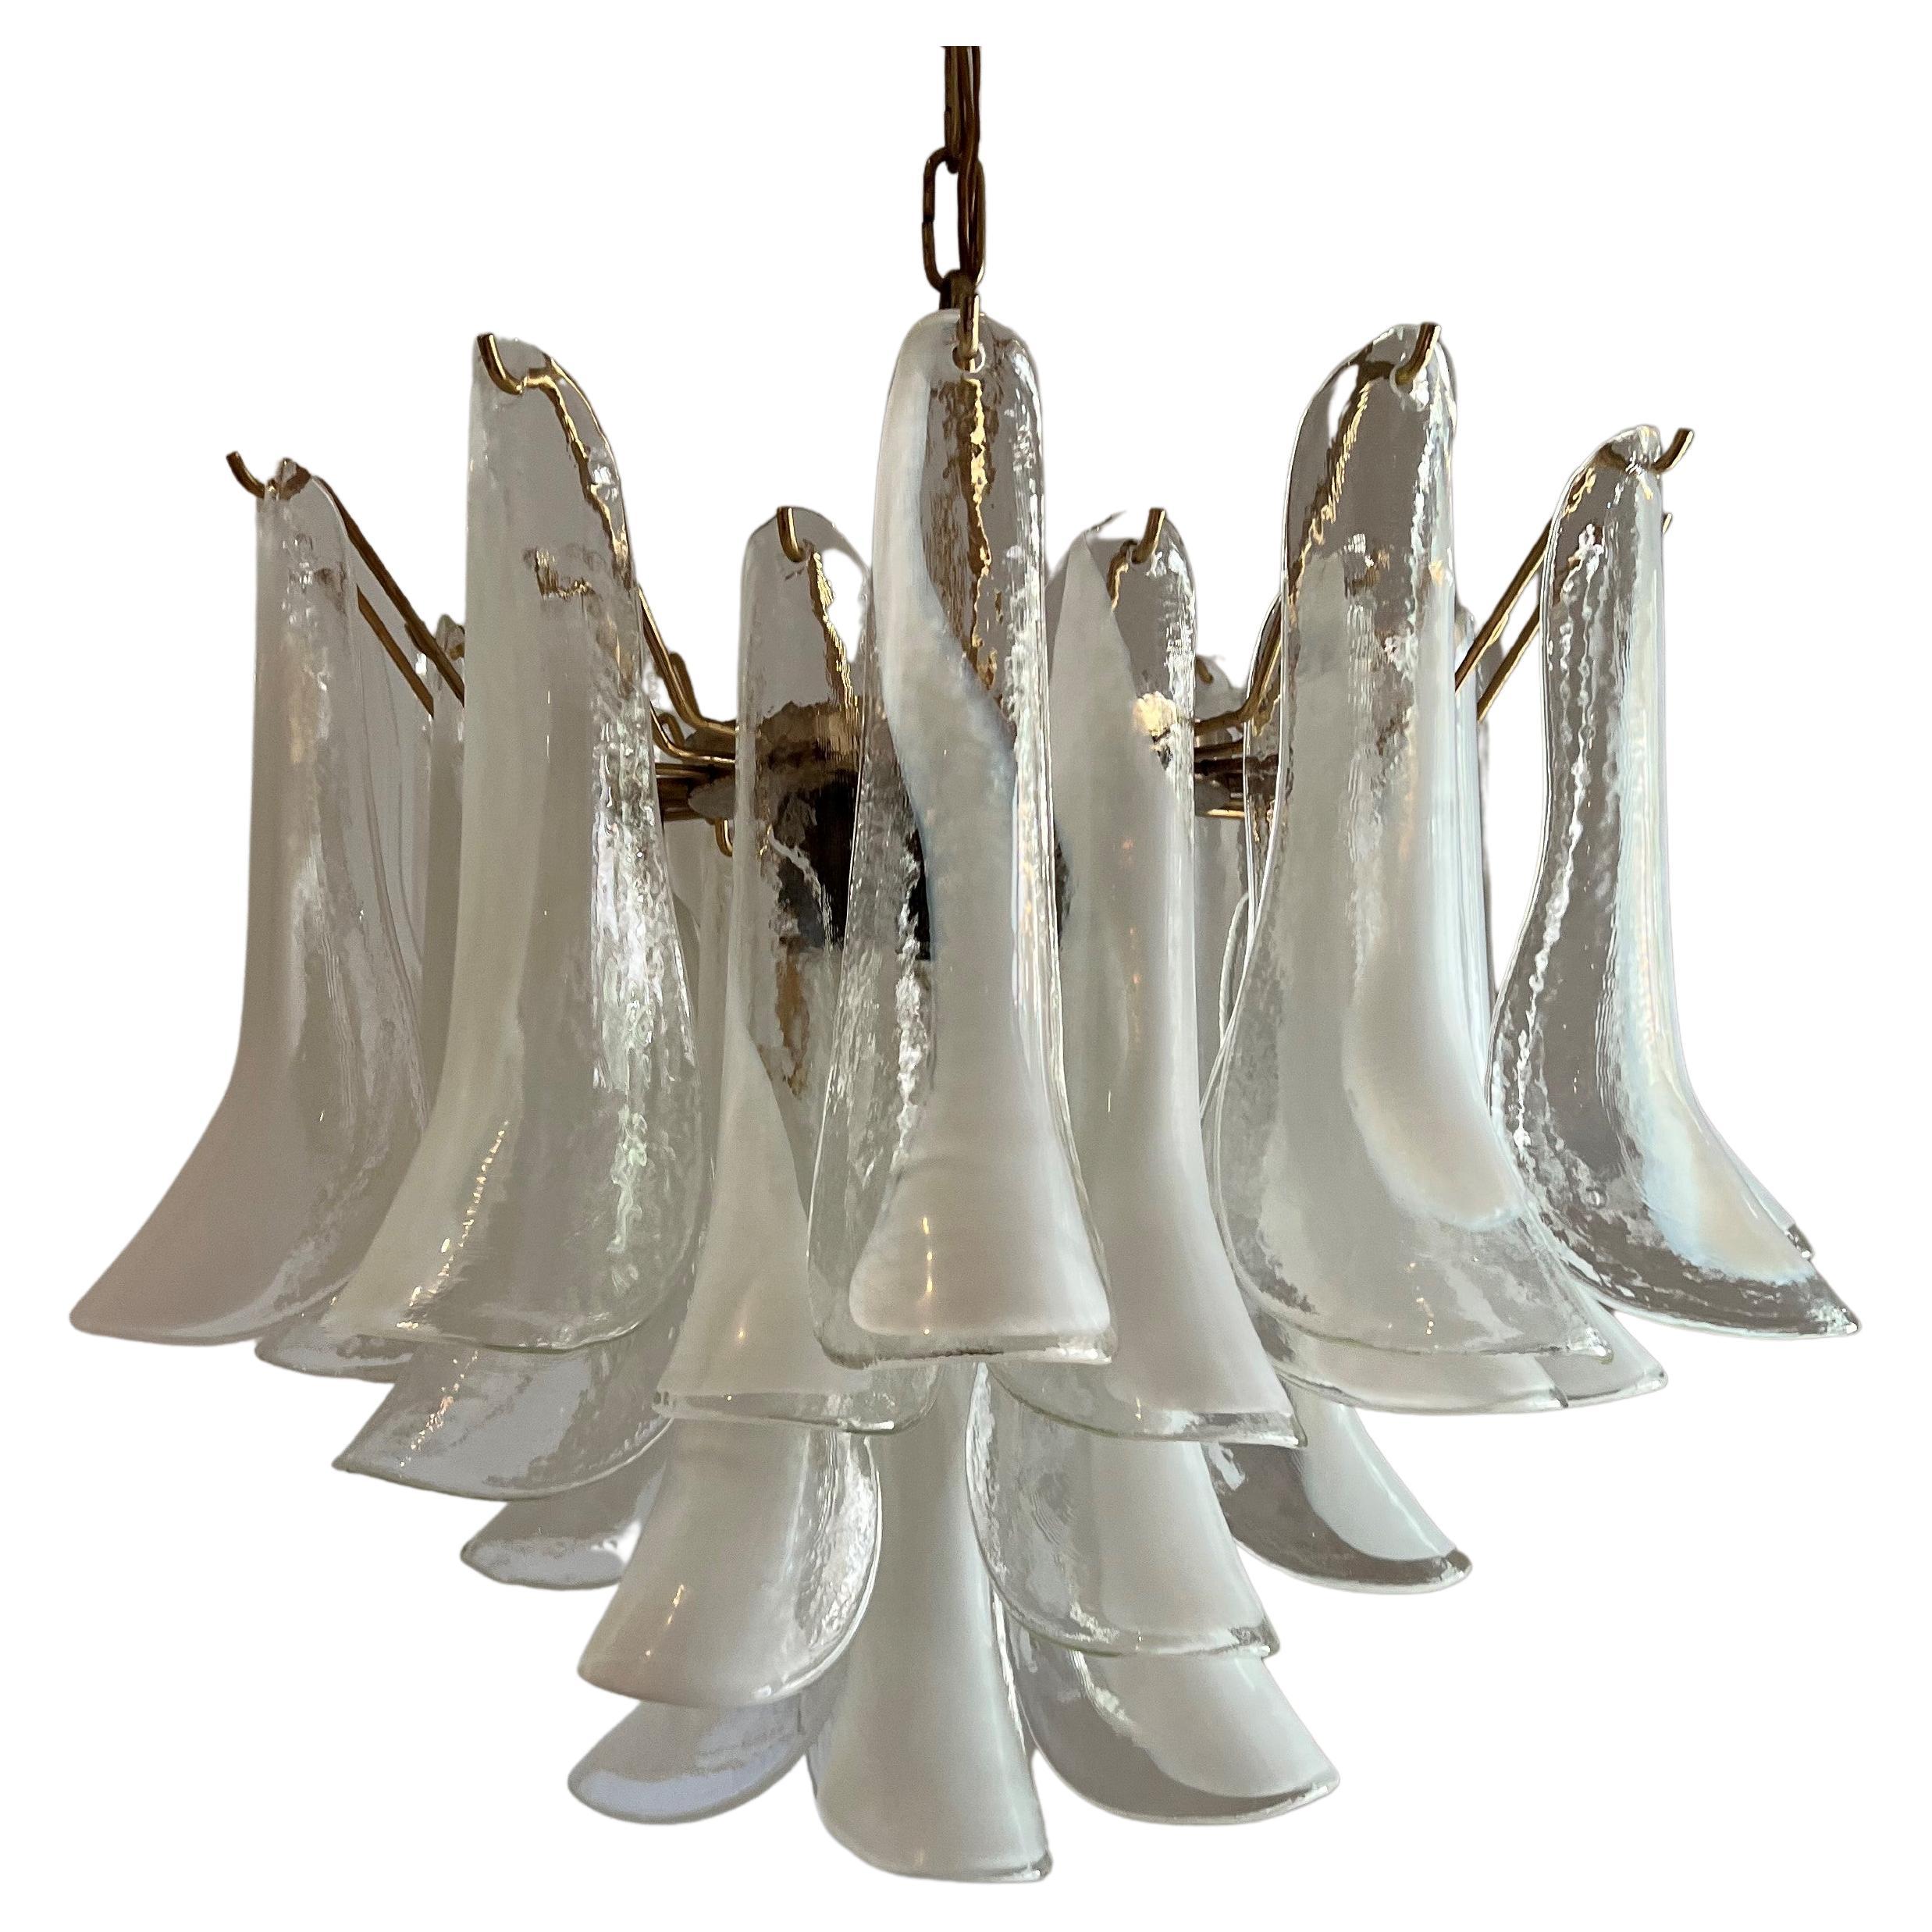 Two Identical Signed Mid-Century Modern Chandeliers, La Murrina in Murano Glass For Sale